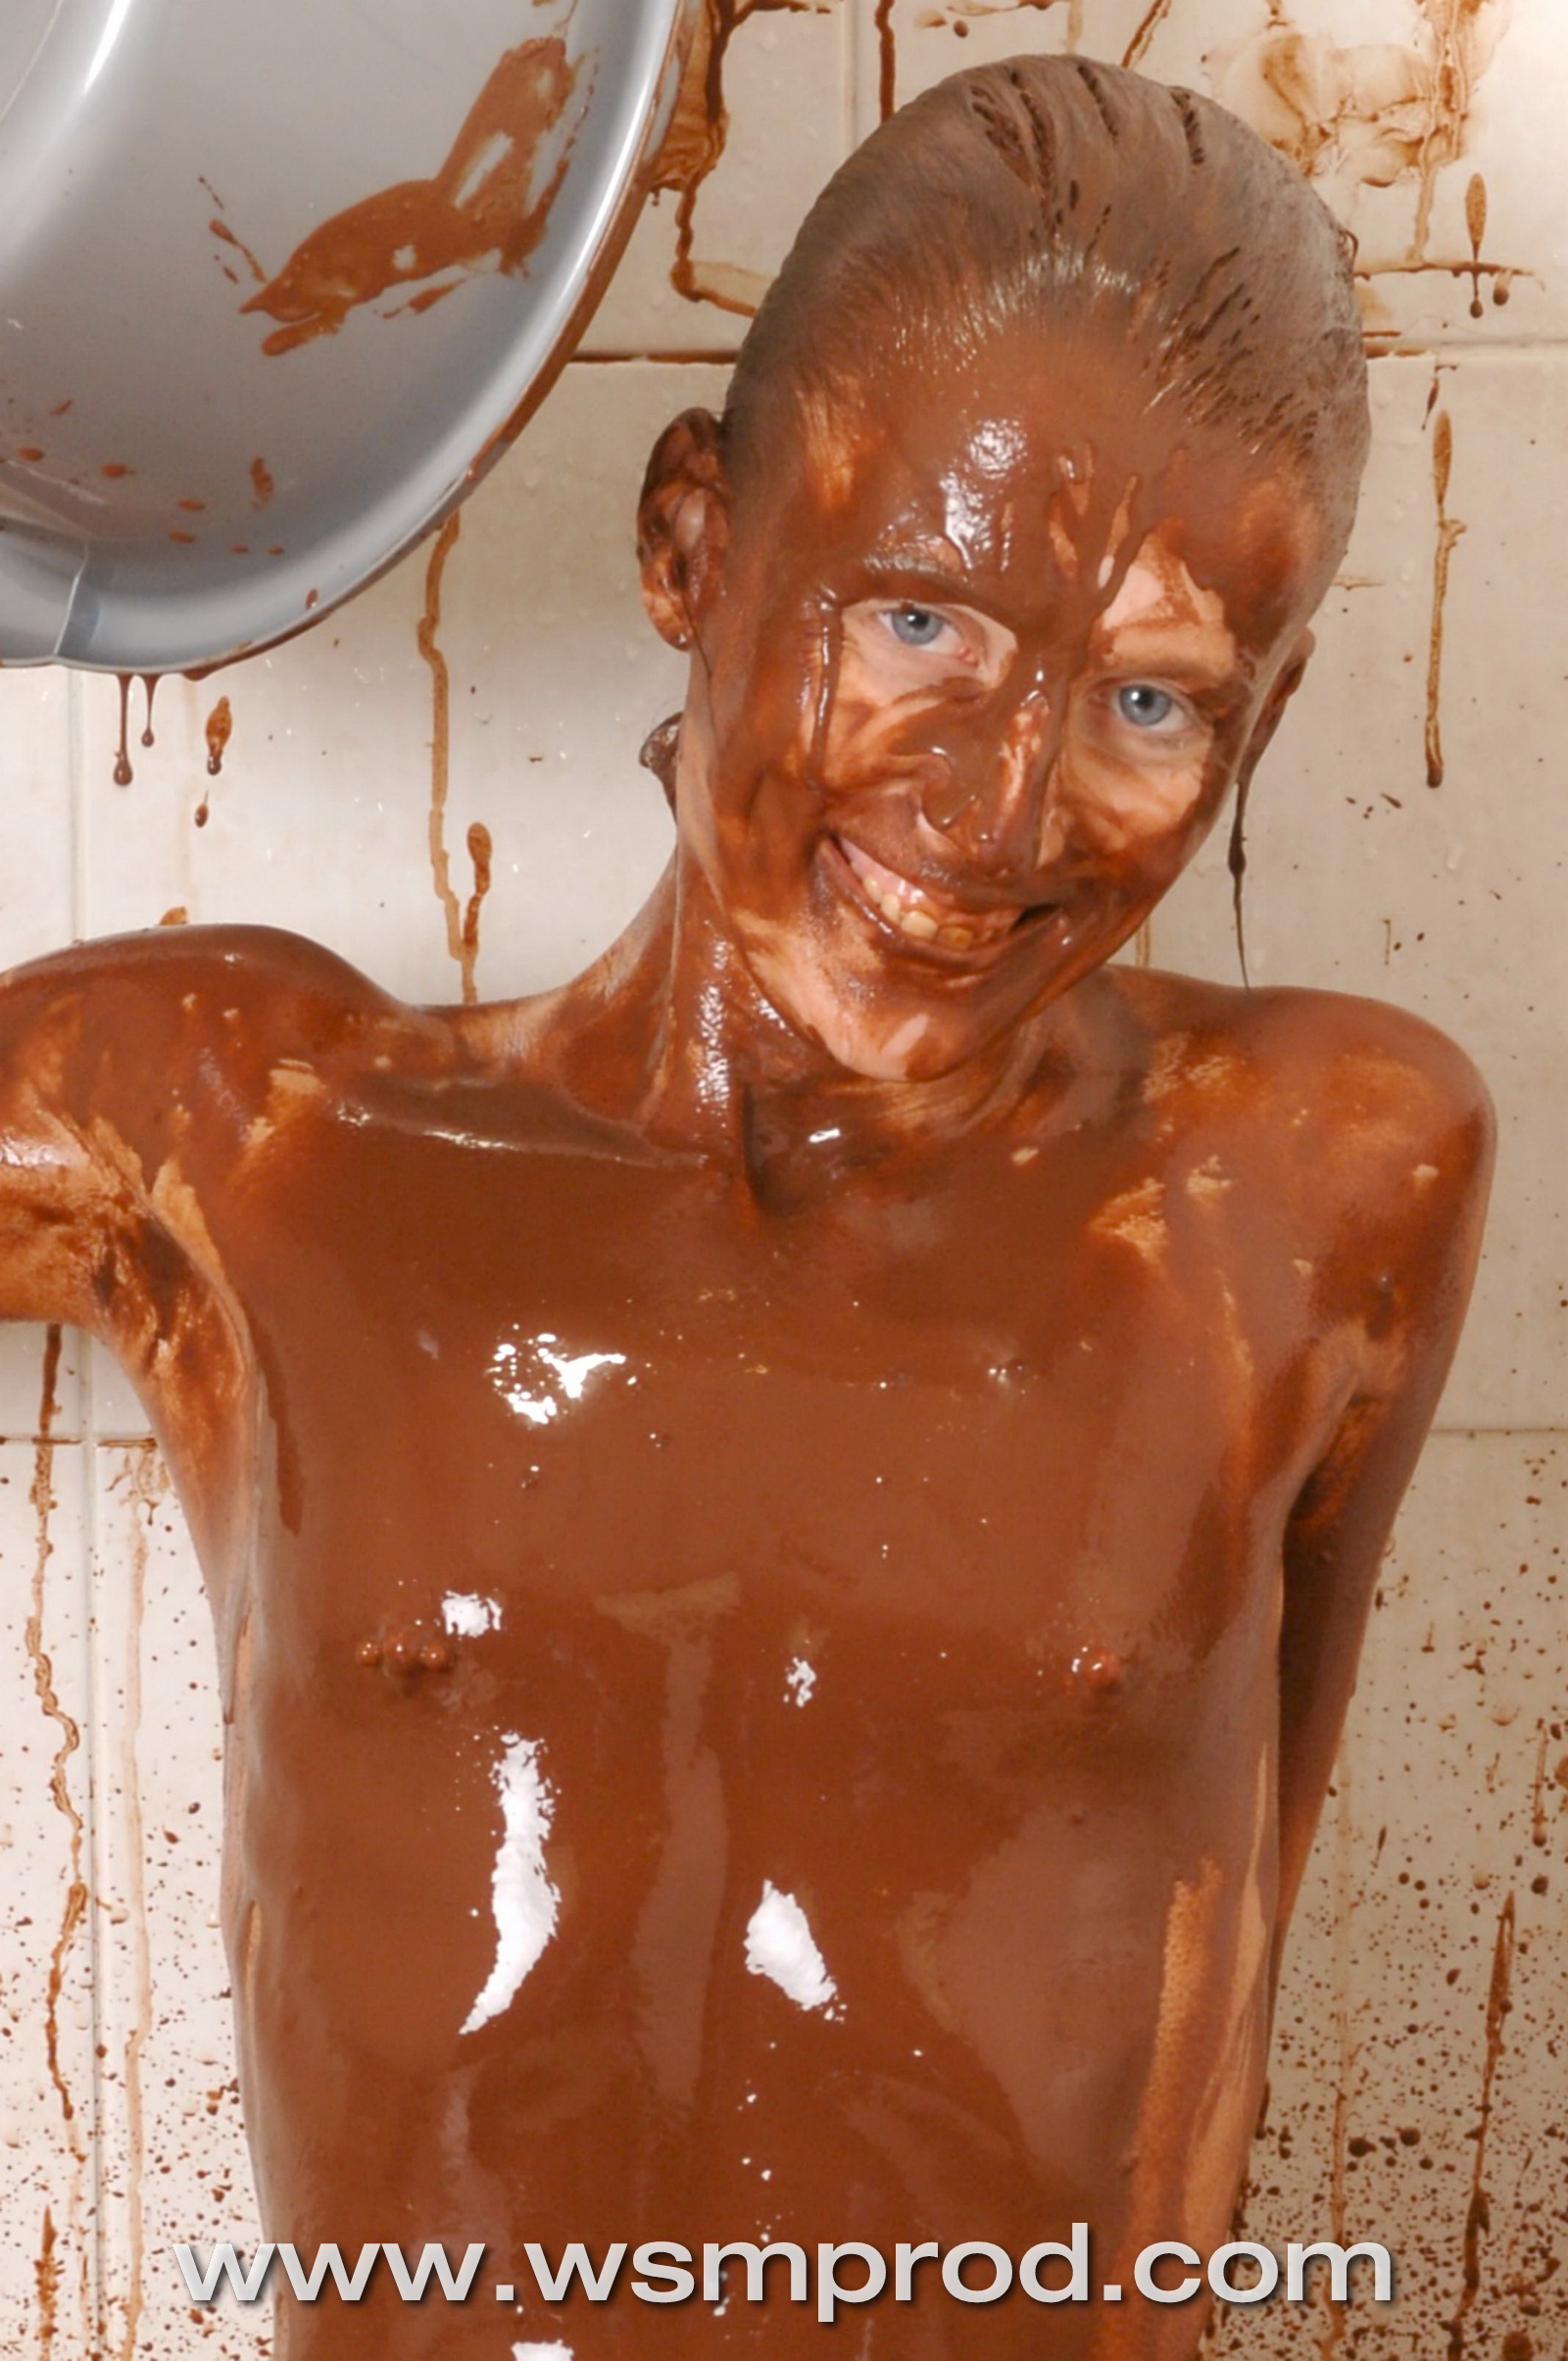 Fashion model Sinead gets messy with chocolate play - WSM 